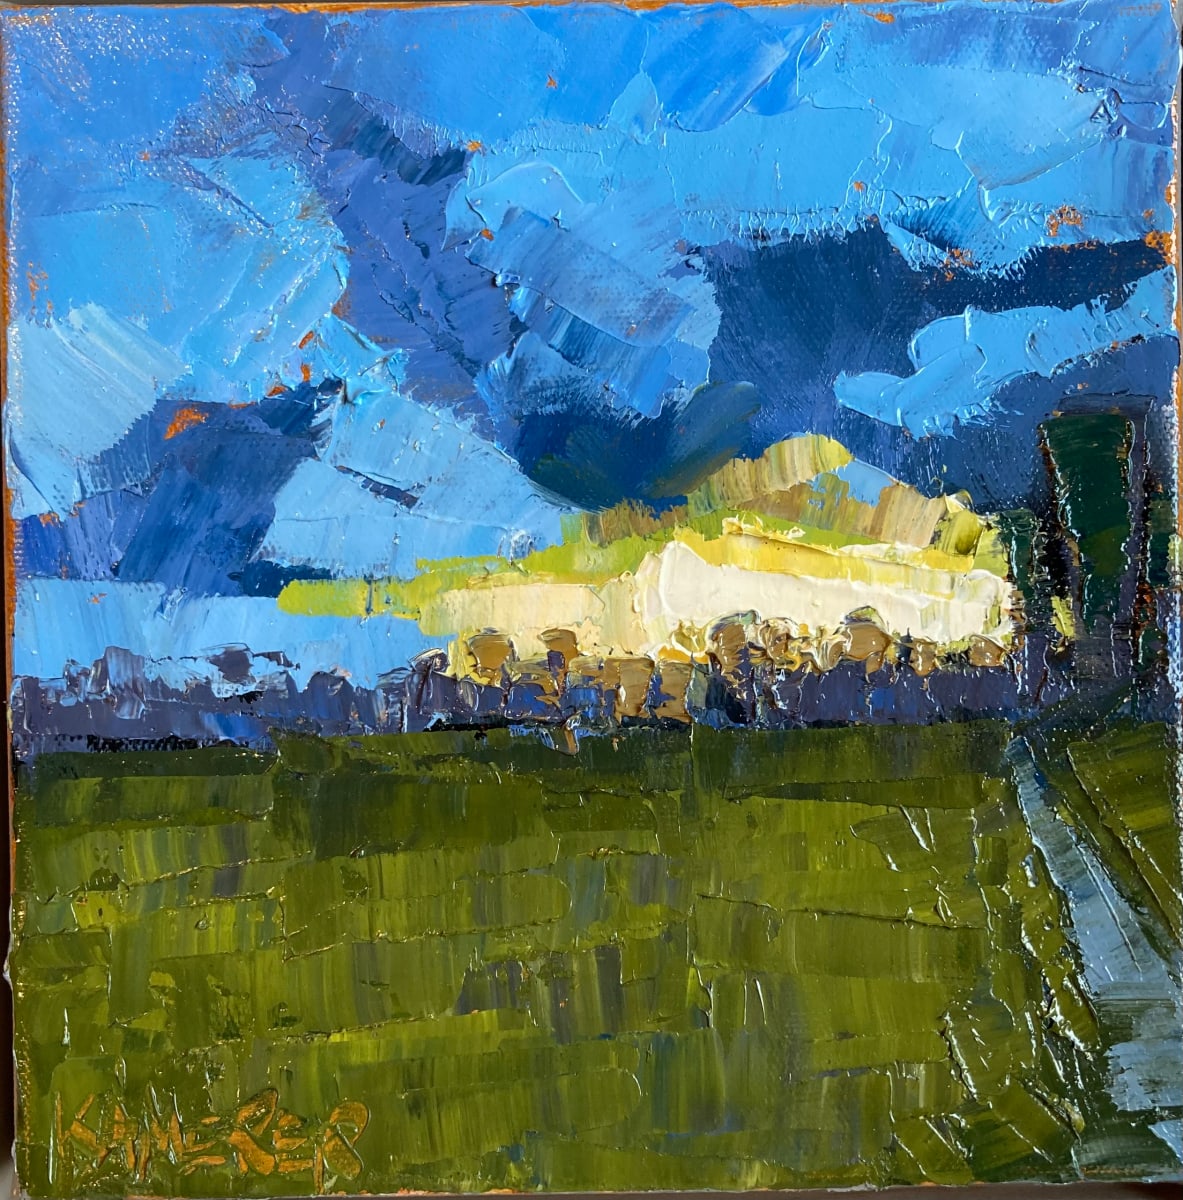 The Road to Sundown by Mary Kamerer Impressionist Painting  Image: From the “Personal Sunset” series.  Framed in a natural floating wood frame. 